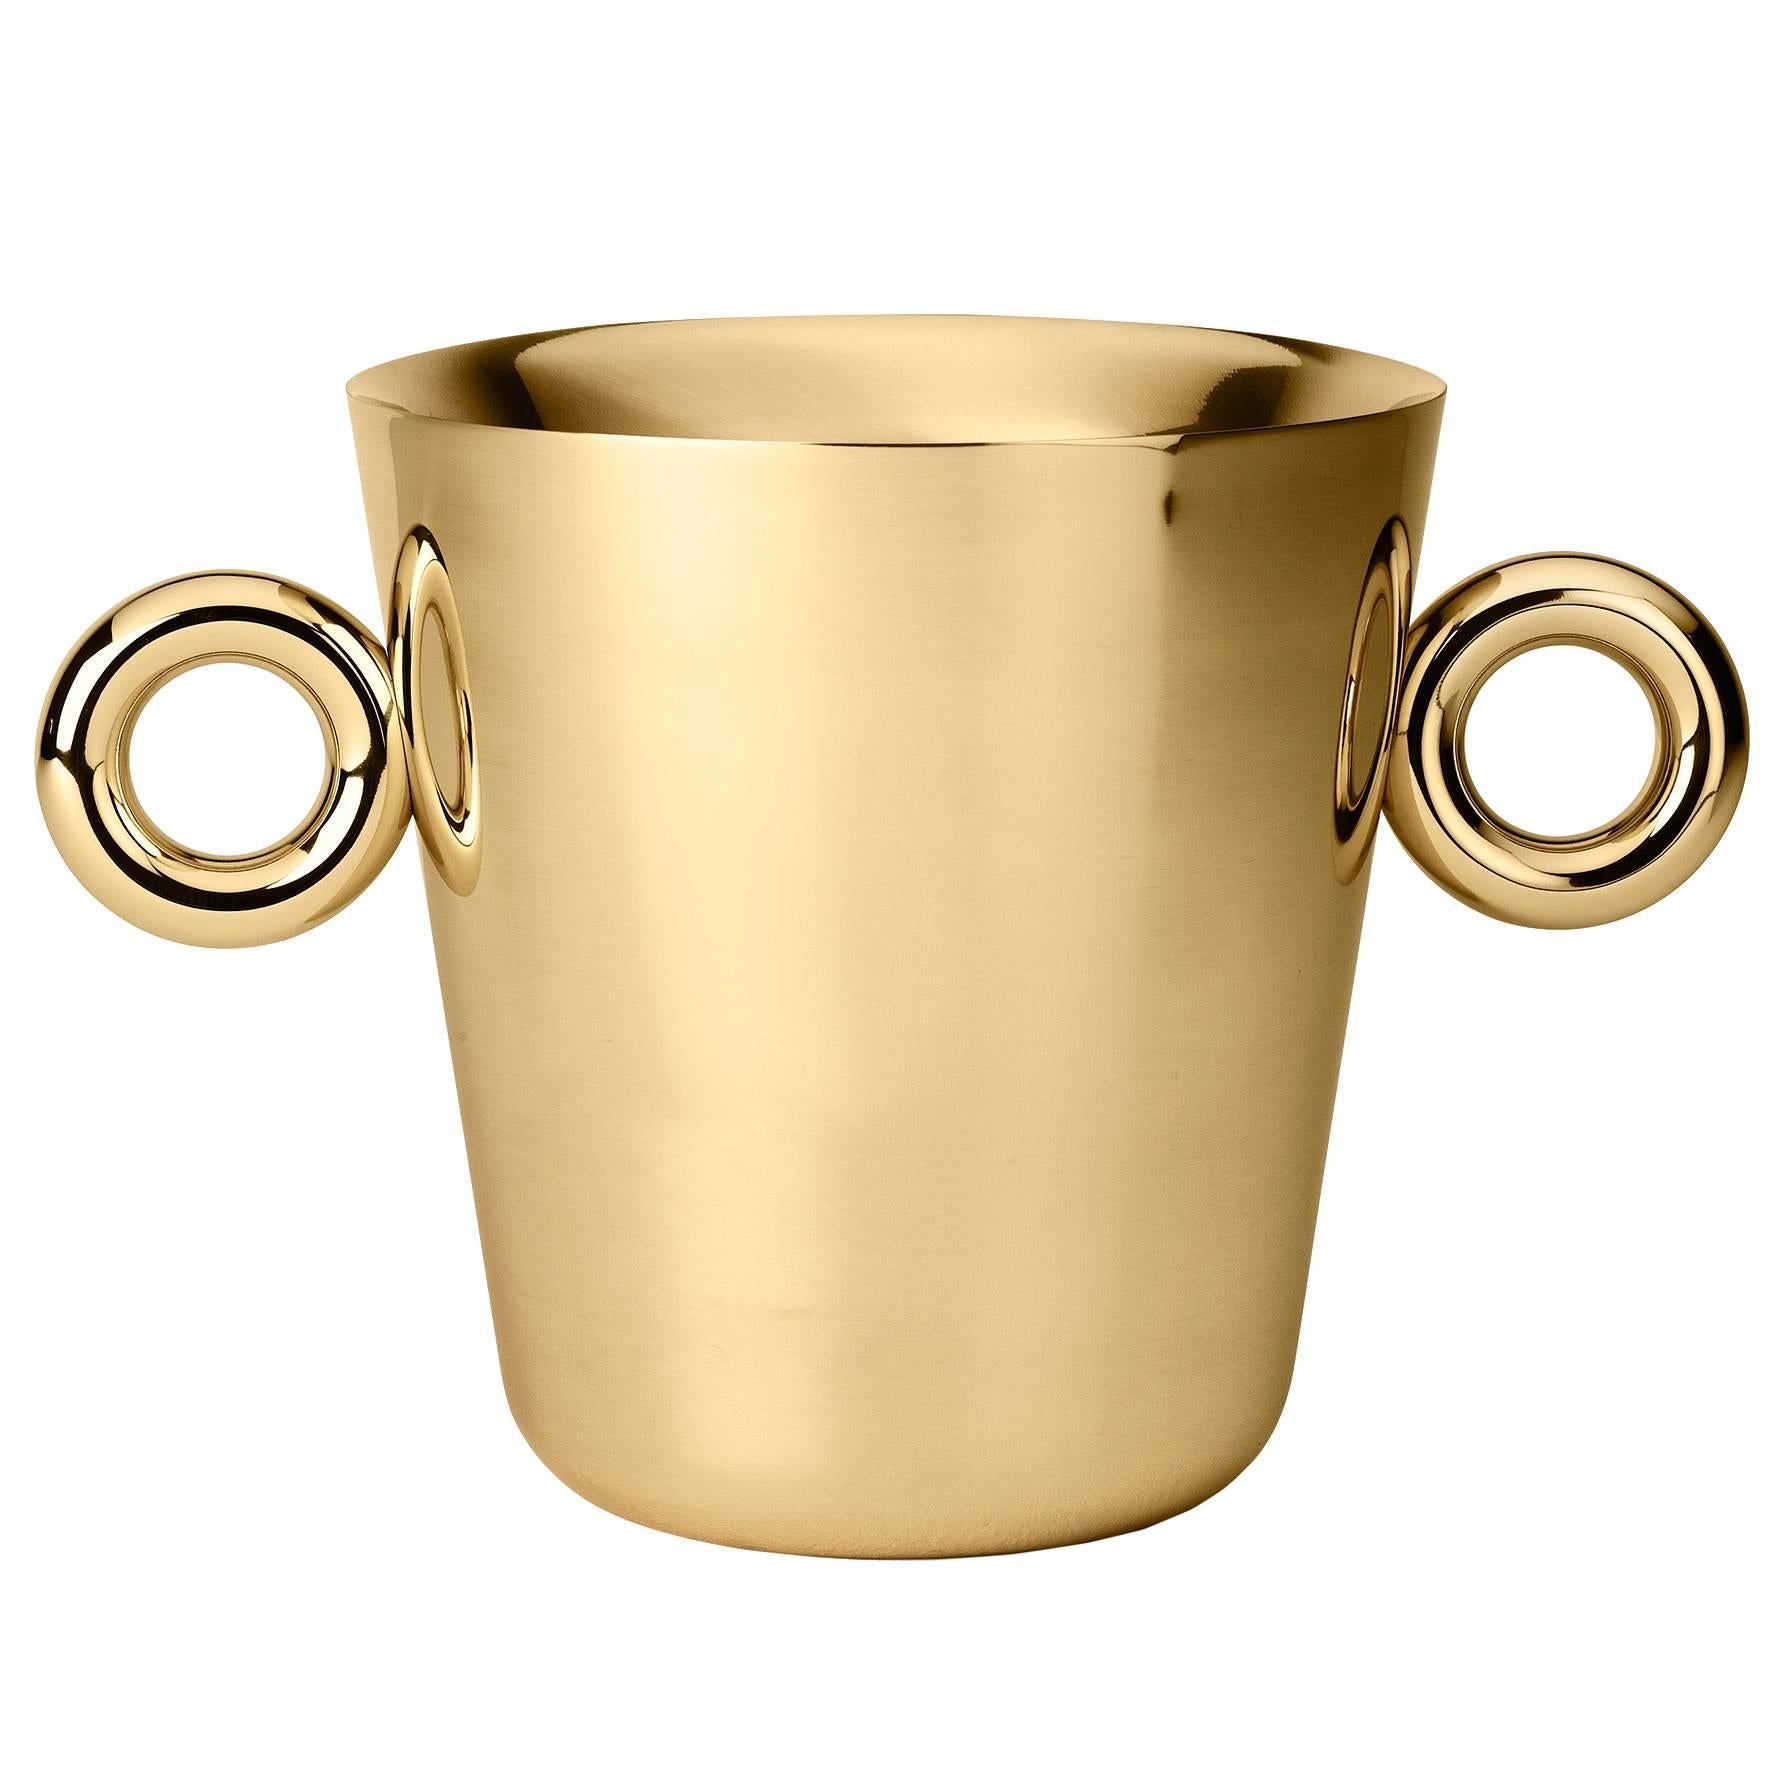 Double "O" Ice Bucket Designed by Richard Hutten for Ghidini, 1961 For Sale